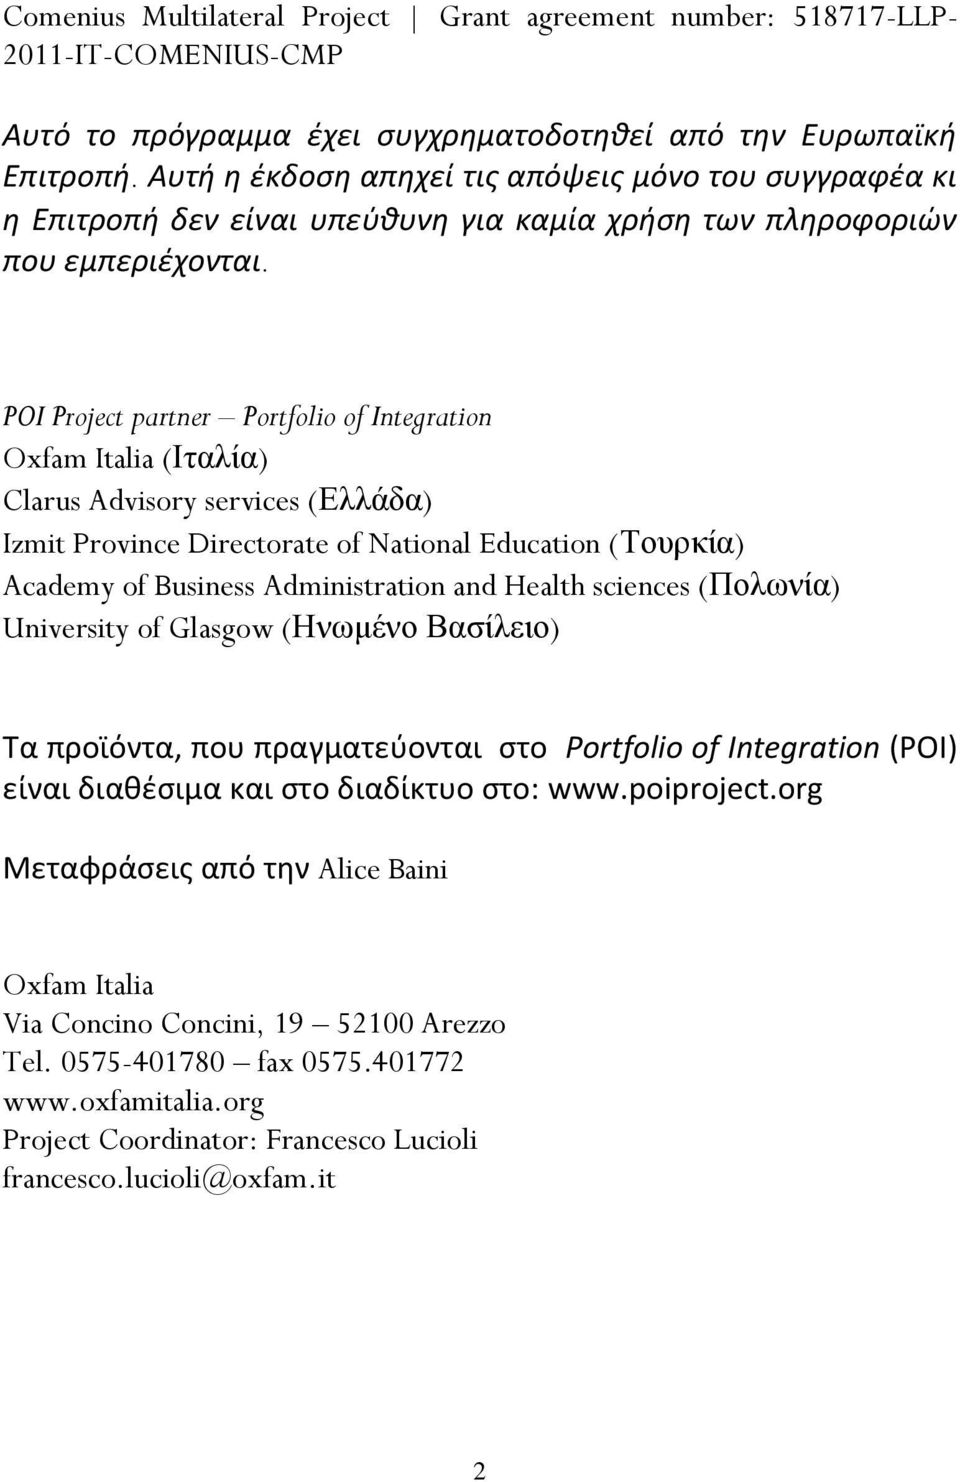 POI Project partner Portfolio of Integration Oxfam Italia (Ιταλία) Clarus Advisory services (Ελλάδα) Izmit Province Directorate of National Education (Τουρκία) Academy of Business Administration and